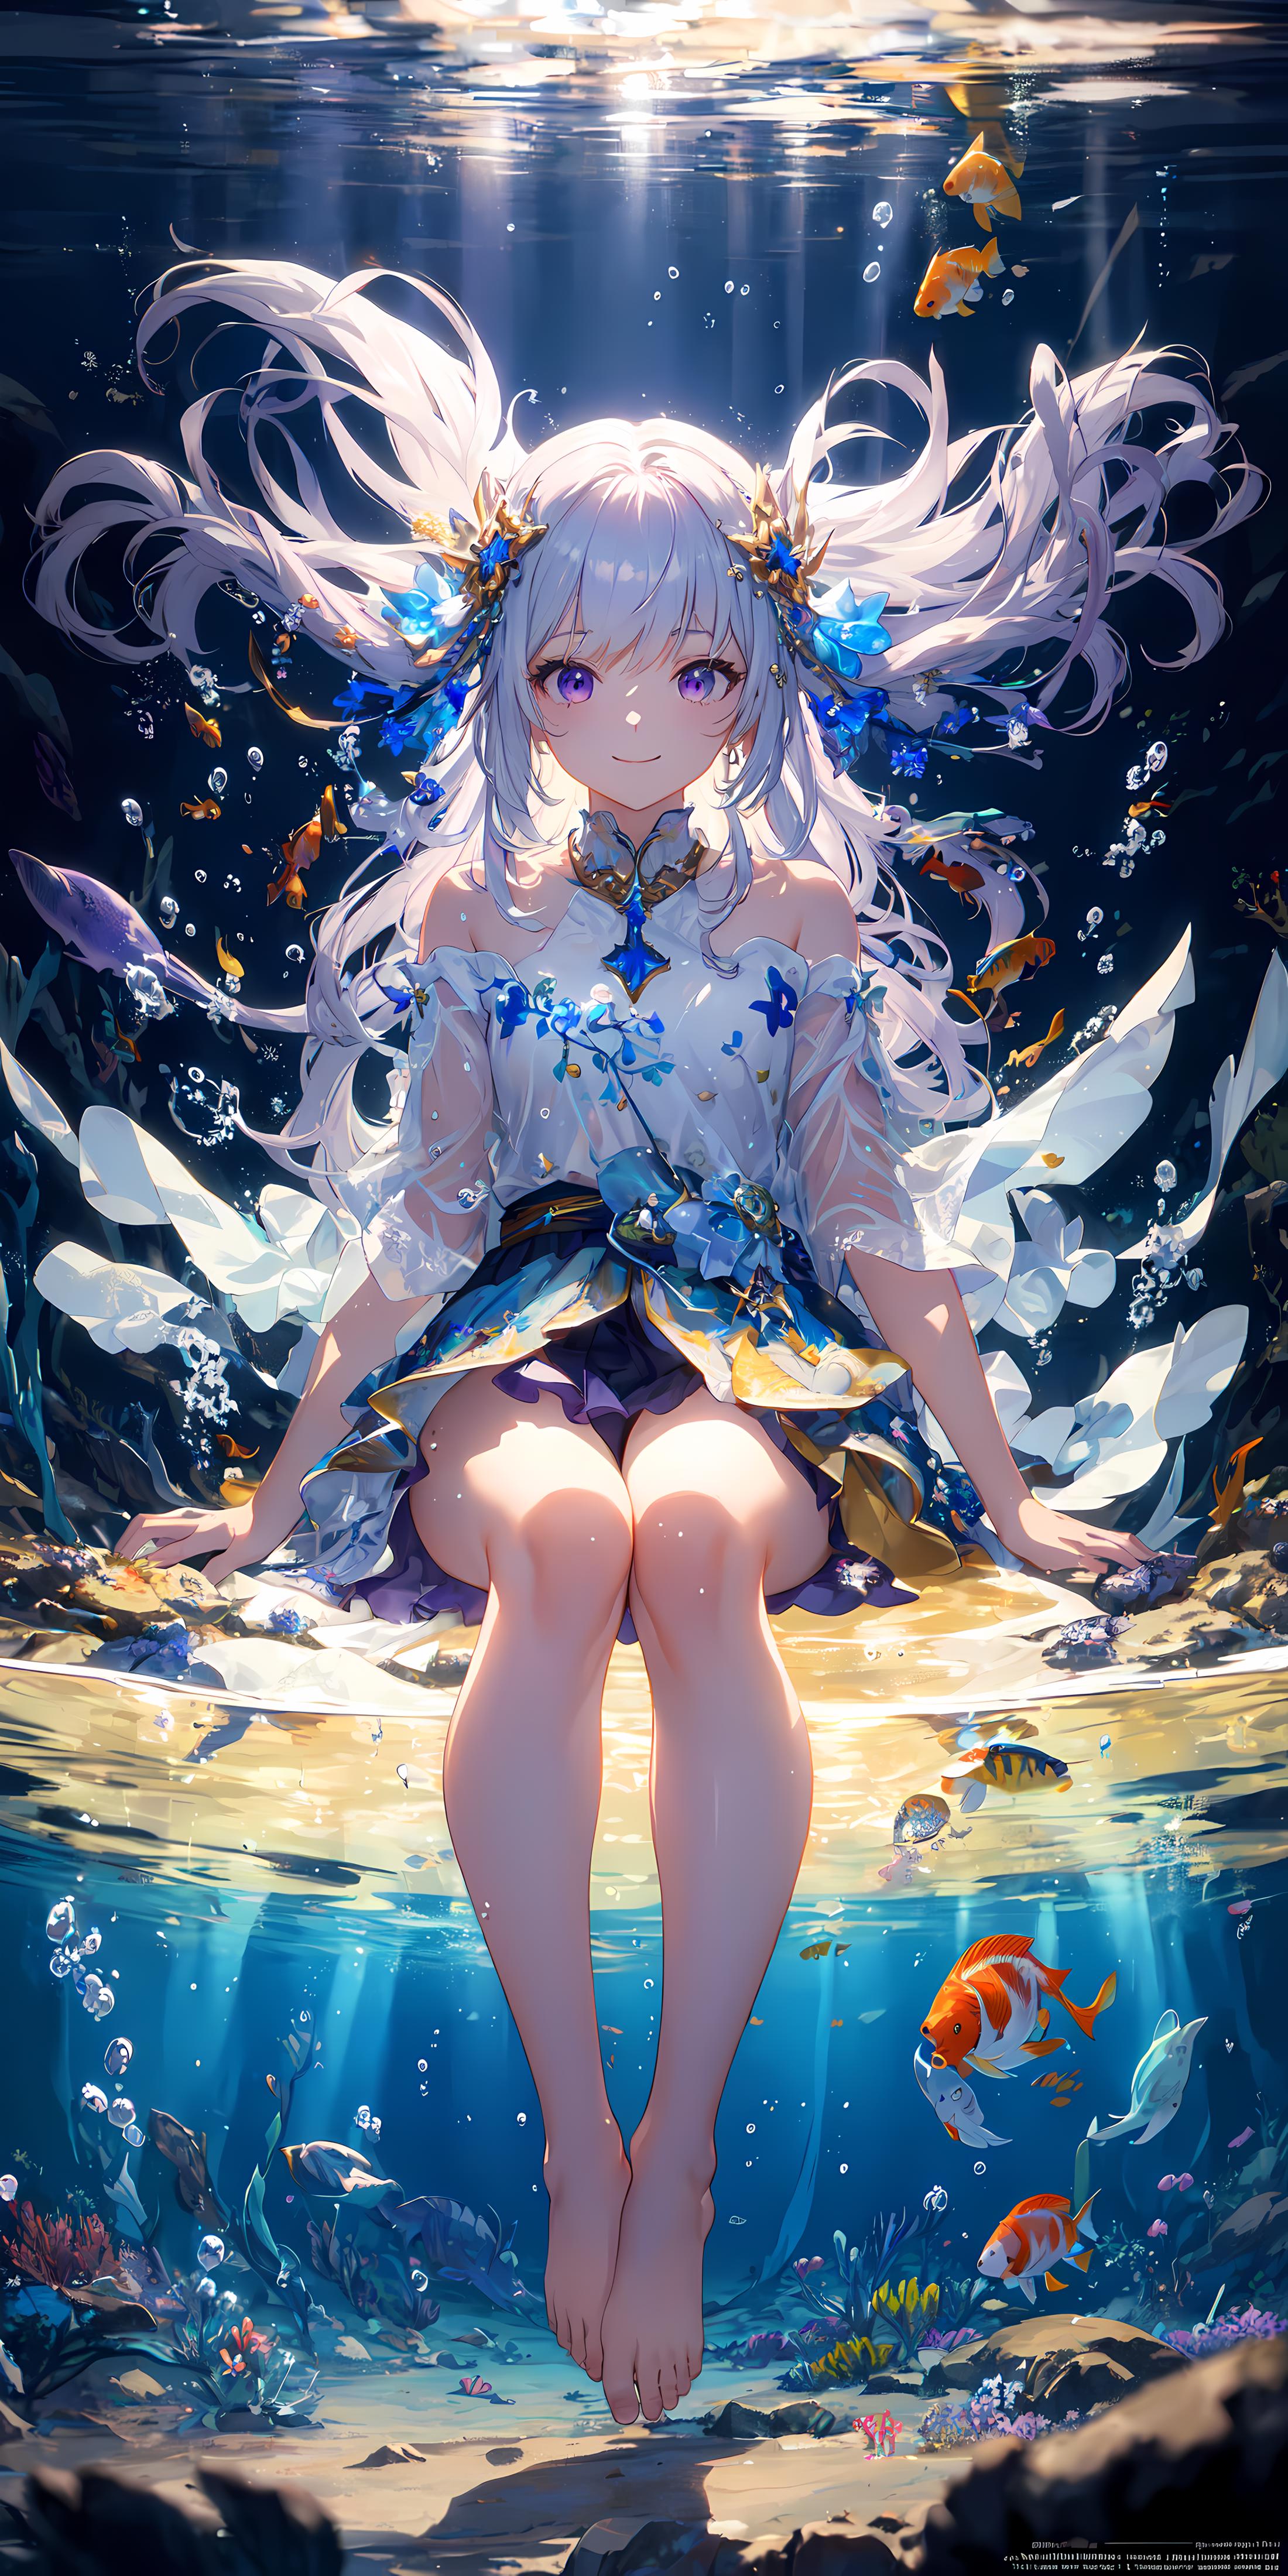 Anime character wearing white dress and blue wings sitting in water.